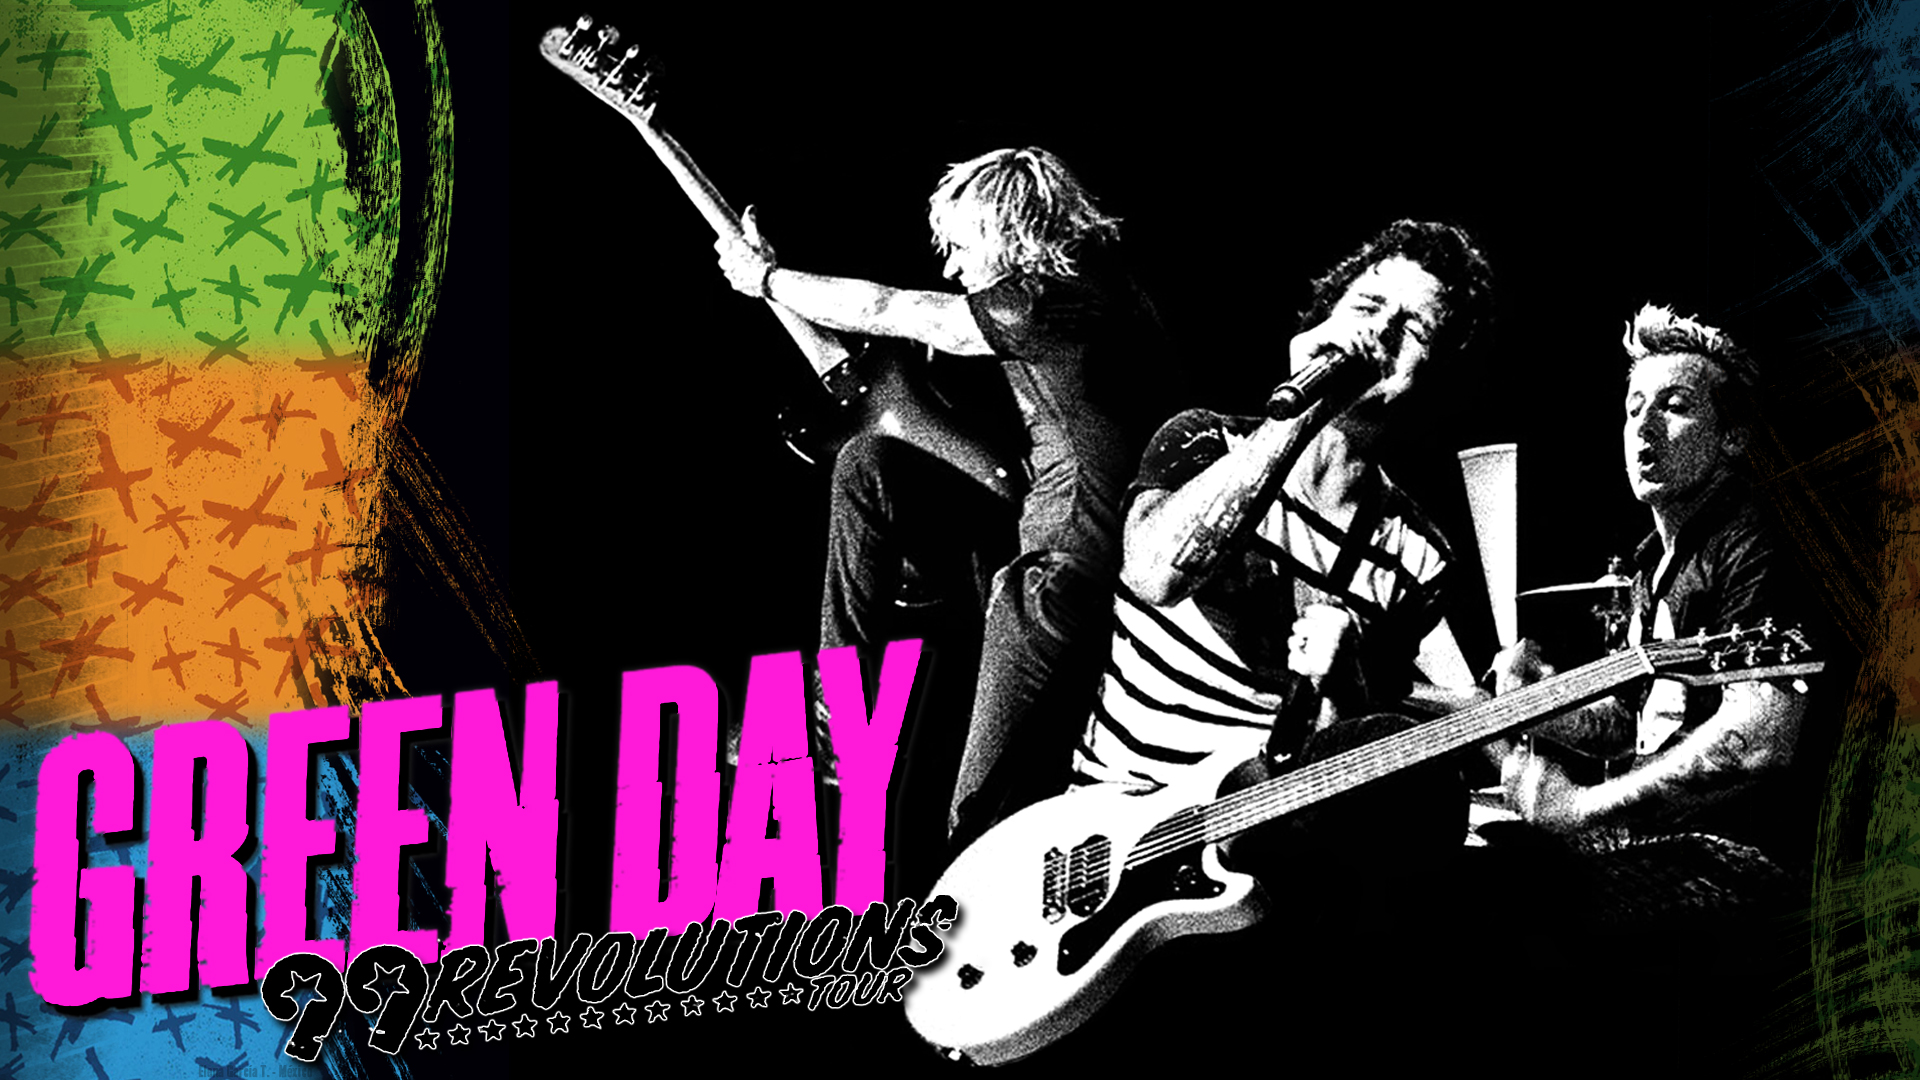 Free Download 99 Revolutions Tour Green Day Wallpaper 1920x1080 For Your Desktop Mobile Tablet Explore 73 Green Day Wallpapers Hd Wallpaper Green Green Wallpaper For My Desktop Green Wallpaper 1920x1080